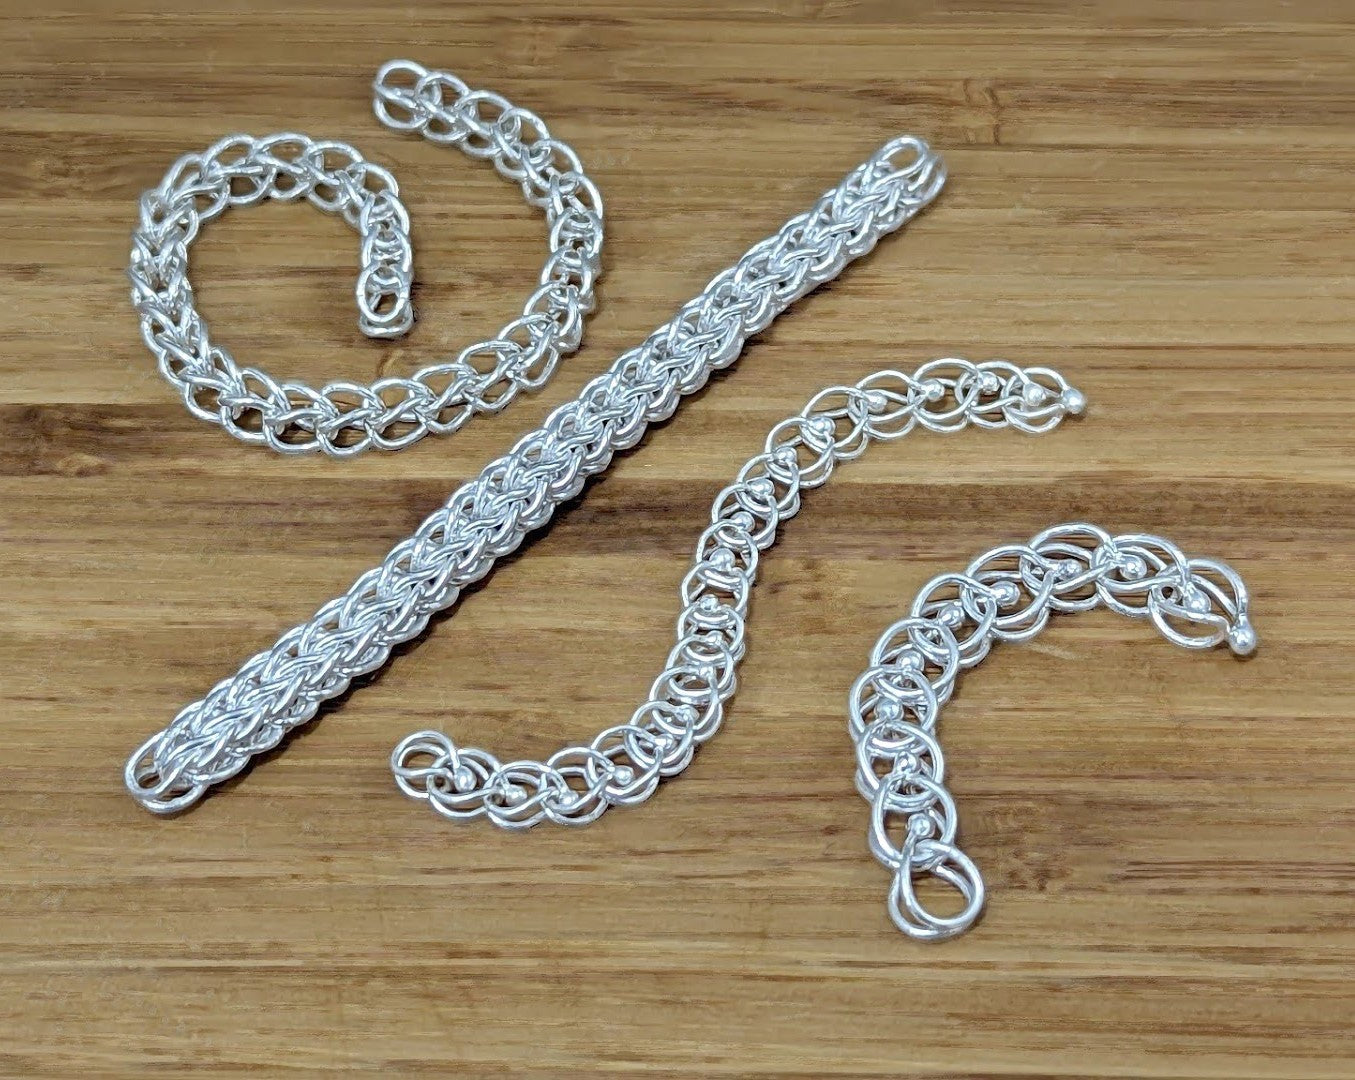 06/01 & 06/08 Fusing Fine Silver & Foxtail Chain (2 days)